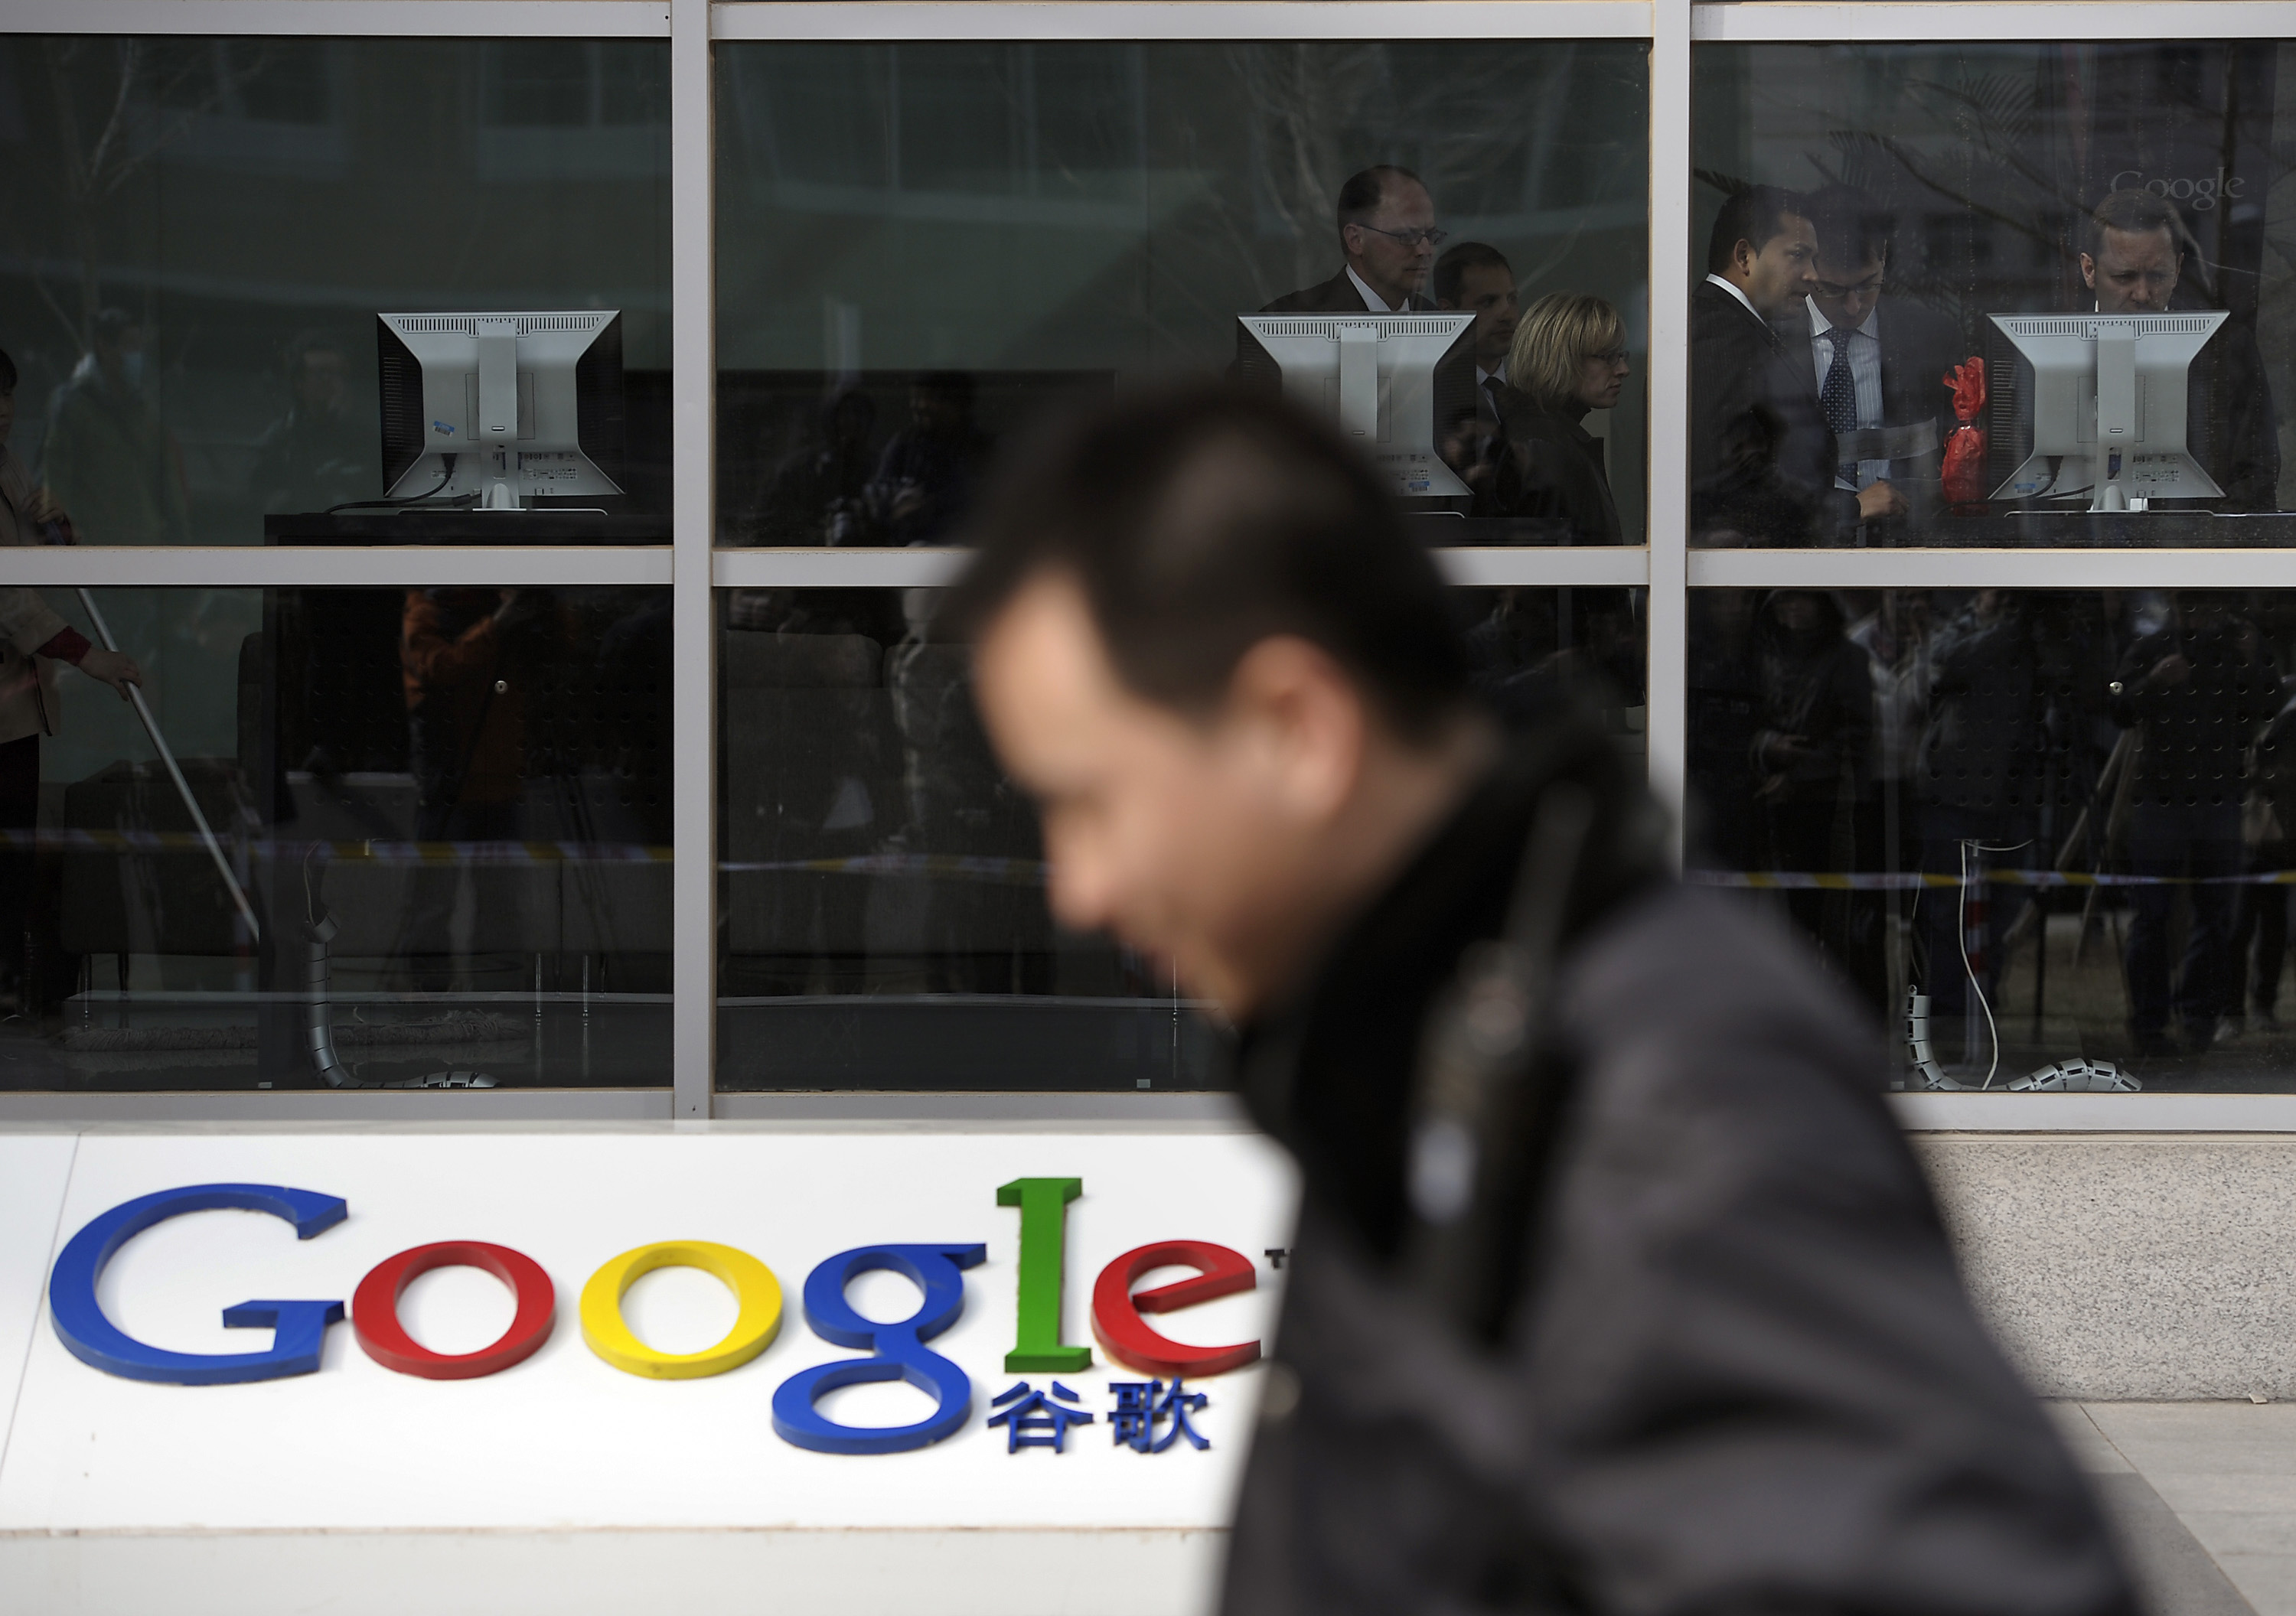 Almost all of Google’s services have been heavily disrupted in China since June. Photo: AP